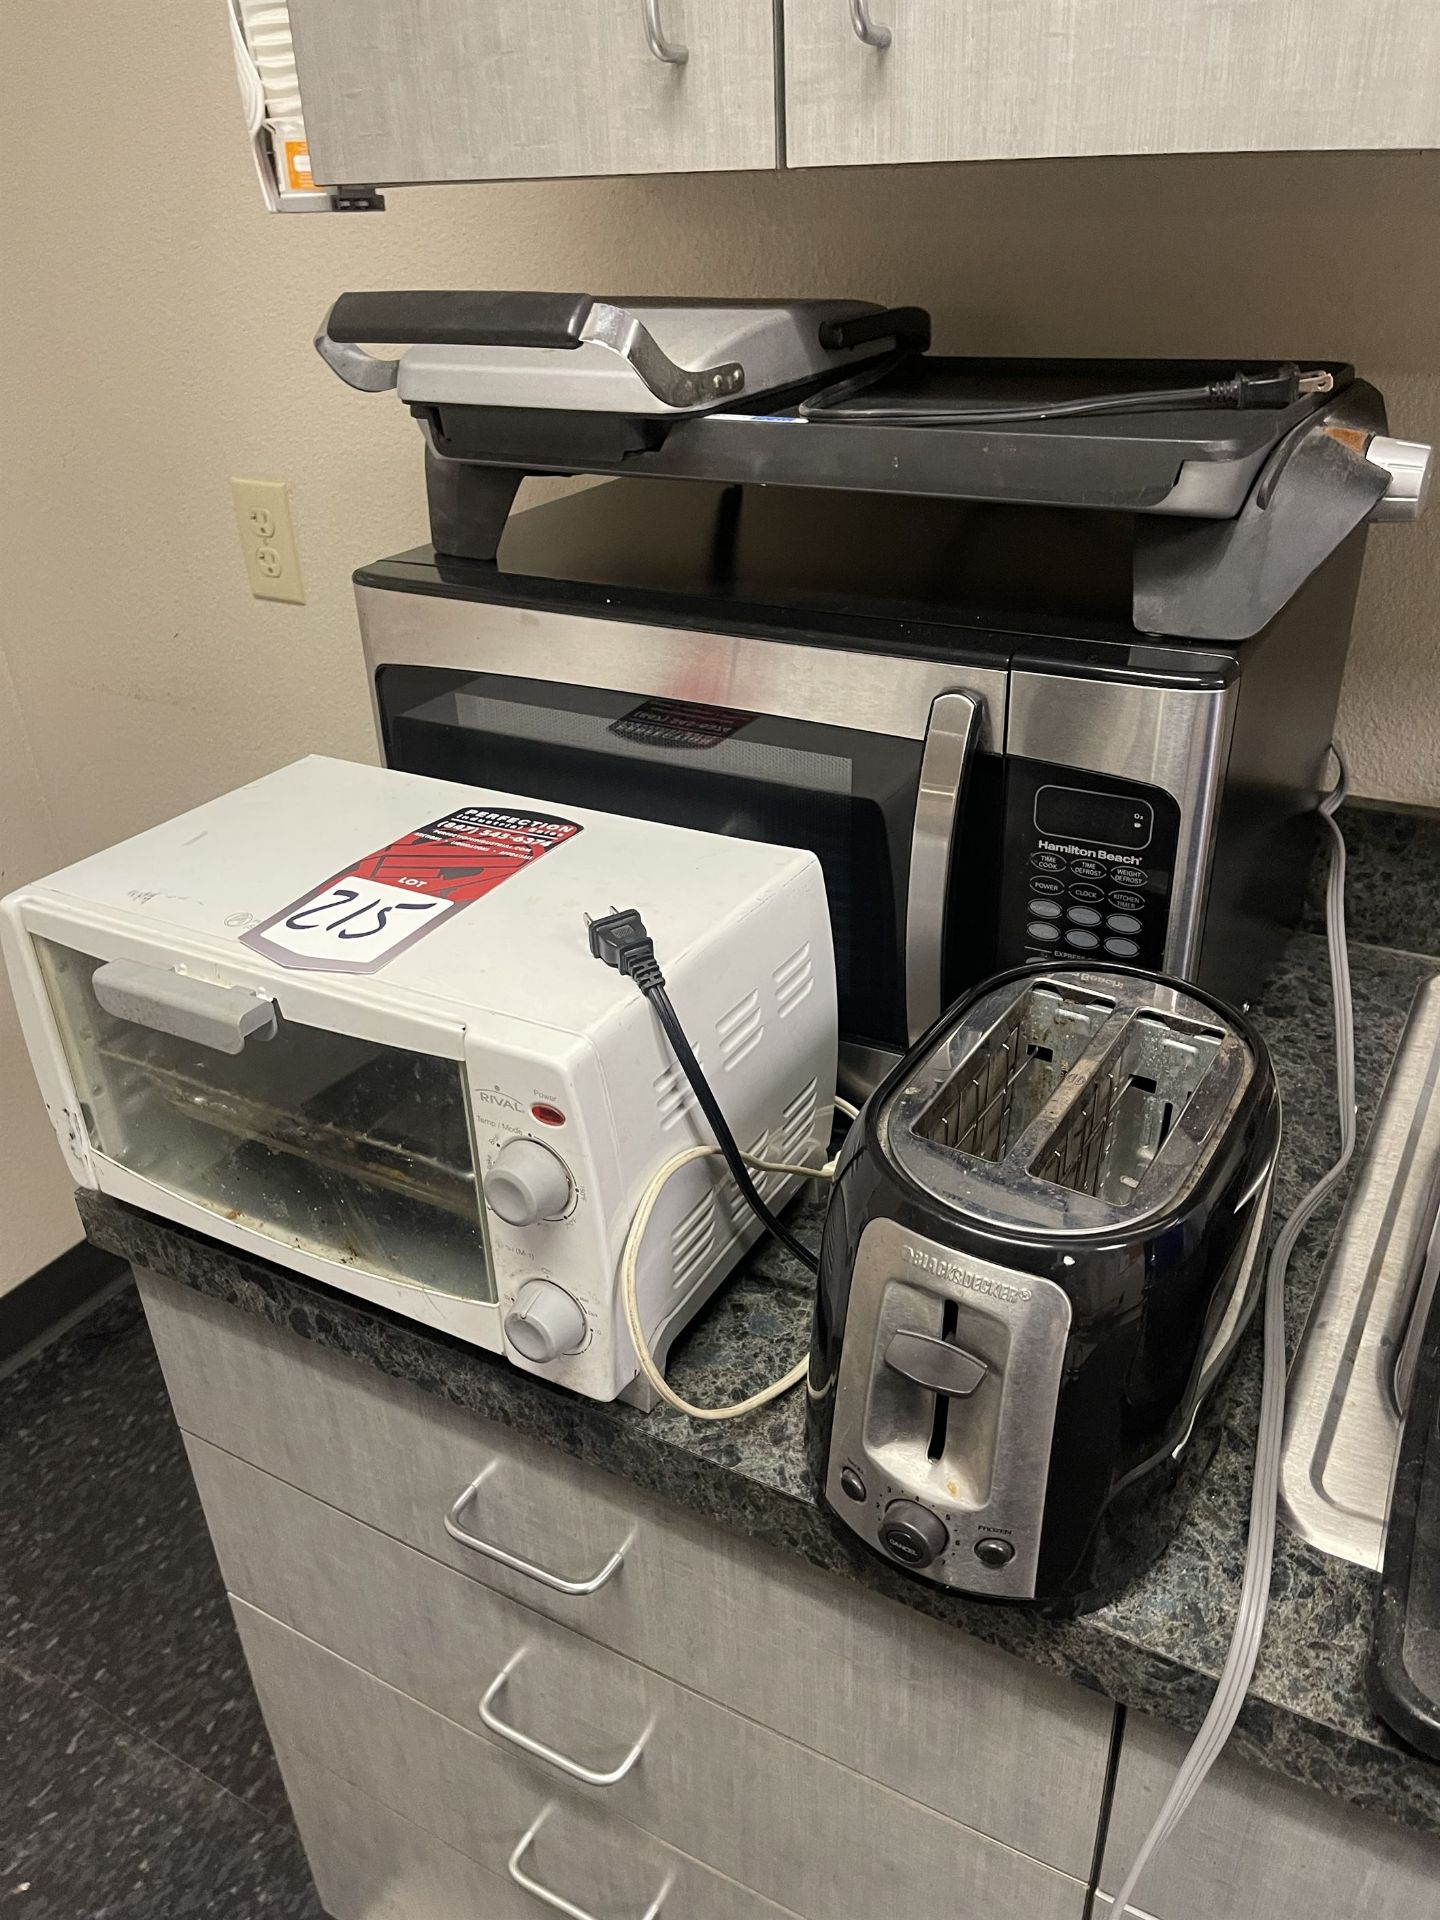 Lot Comprising Microwave, George Foreman Grill, Toaster and Toaster Oven